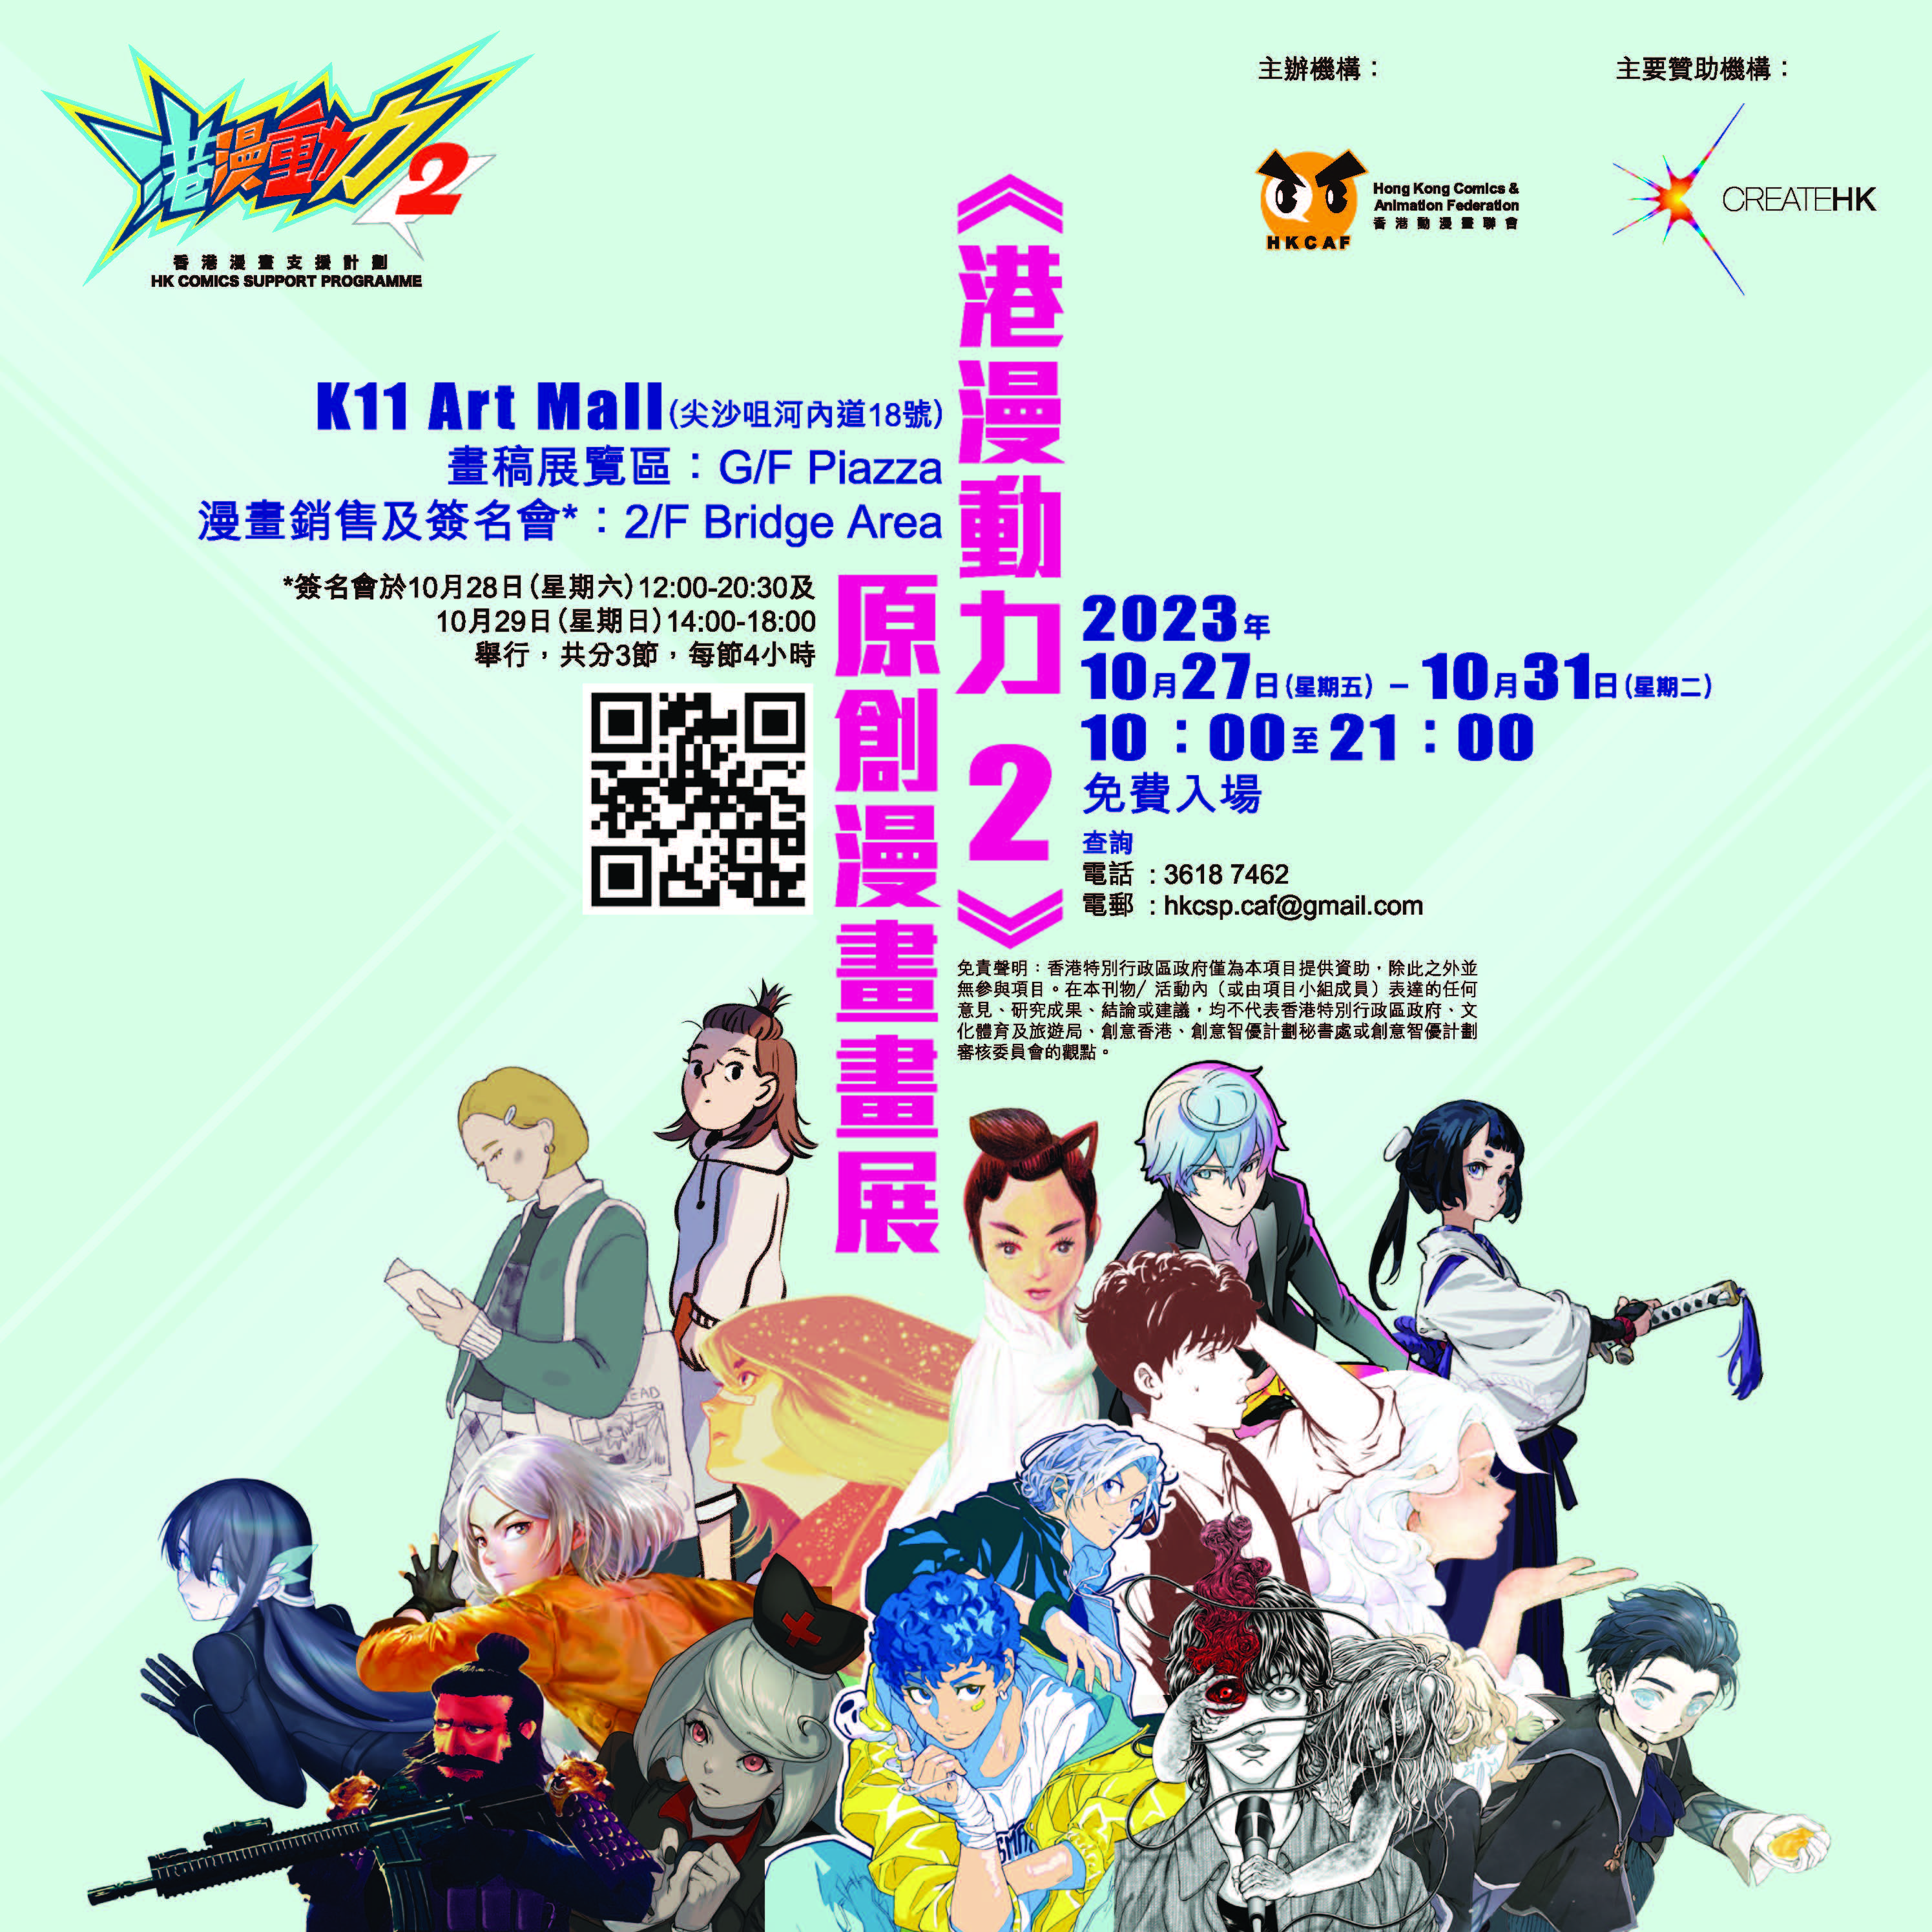 2nd HK Comics Support Programme – FREE admission to physical original comics exhibition on 27 to 31 October with autograph sessions by comic artists on 28 and 29 October